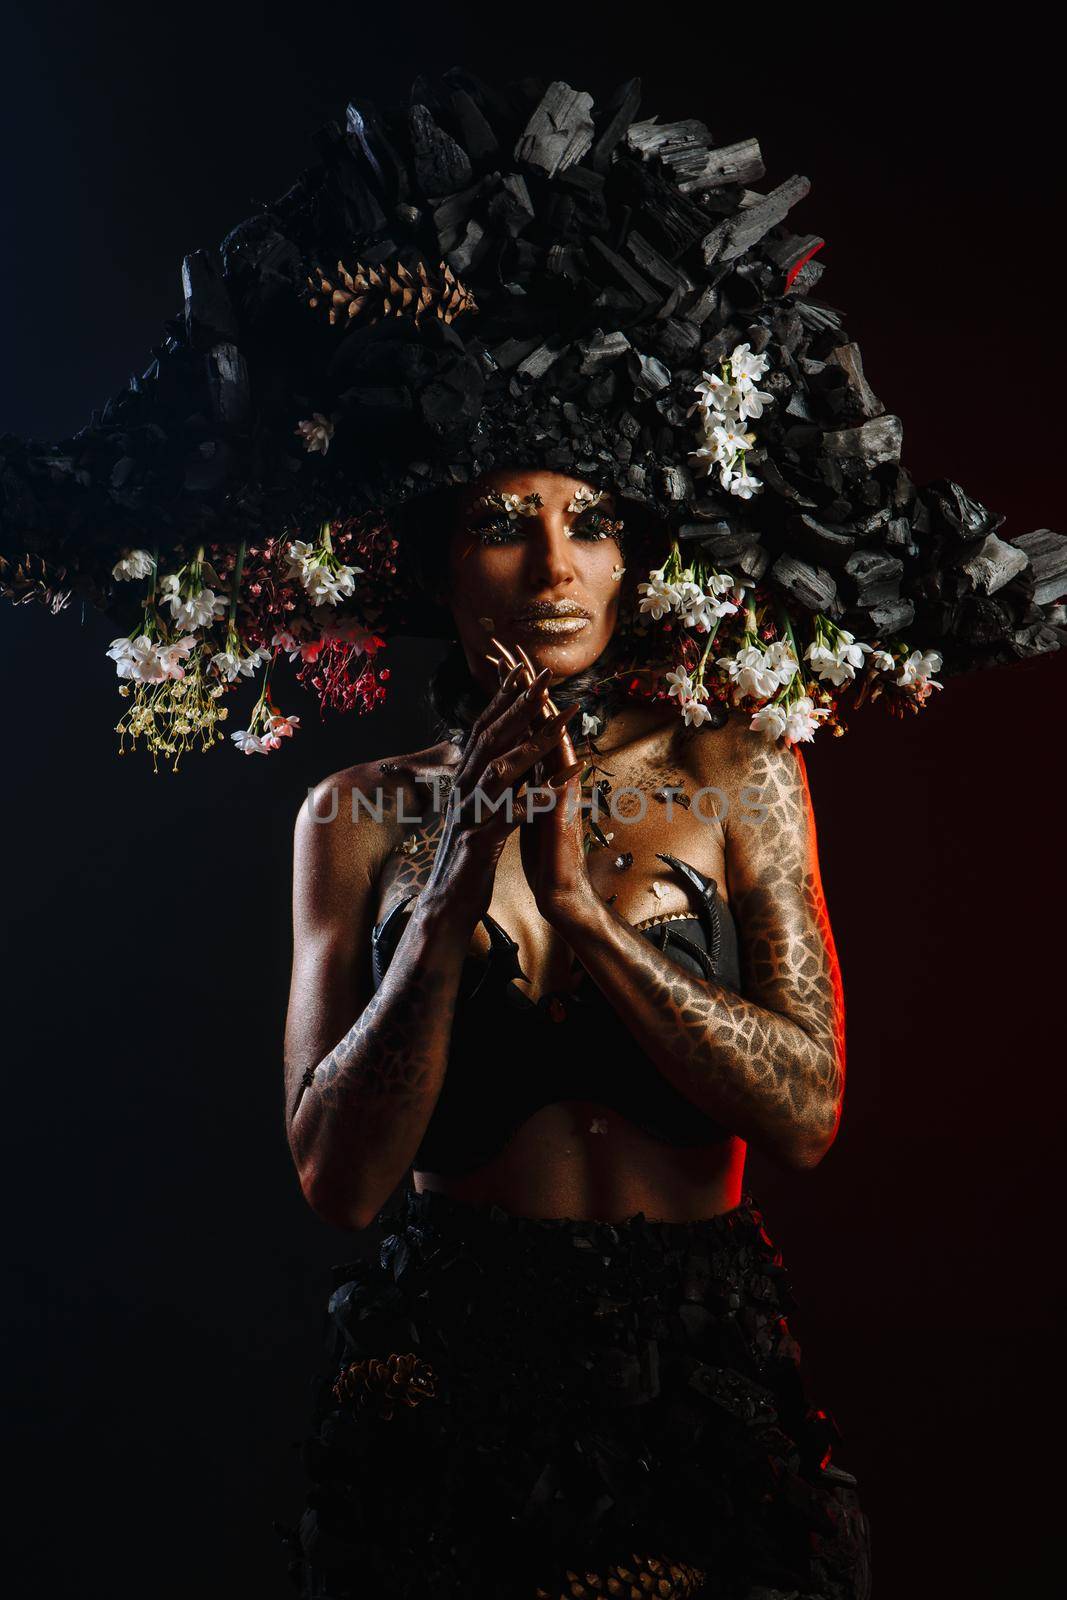 Portrait of a model in a headdress and dress made of coal.